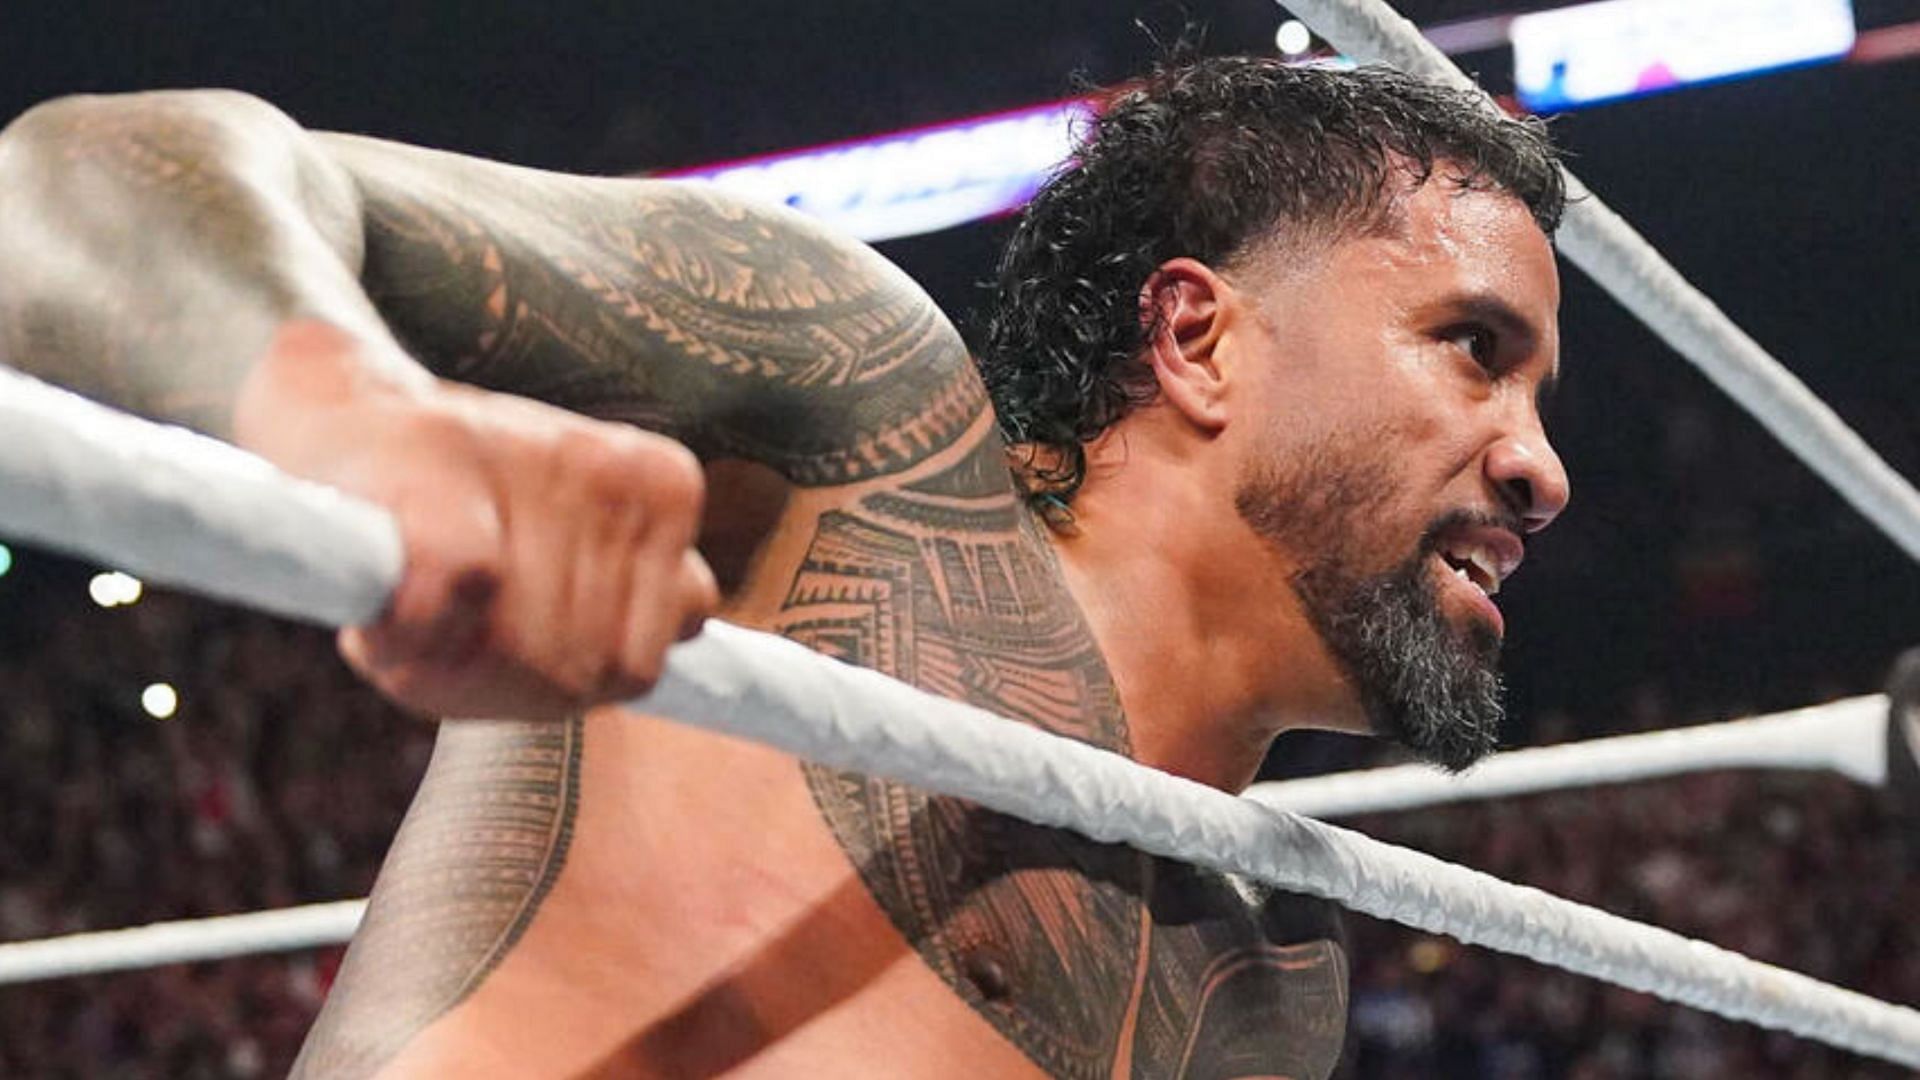 Will Jey Uso capture his first singles title in WWE this year?